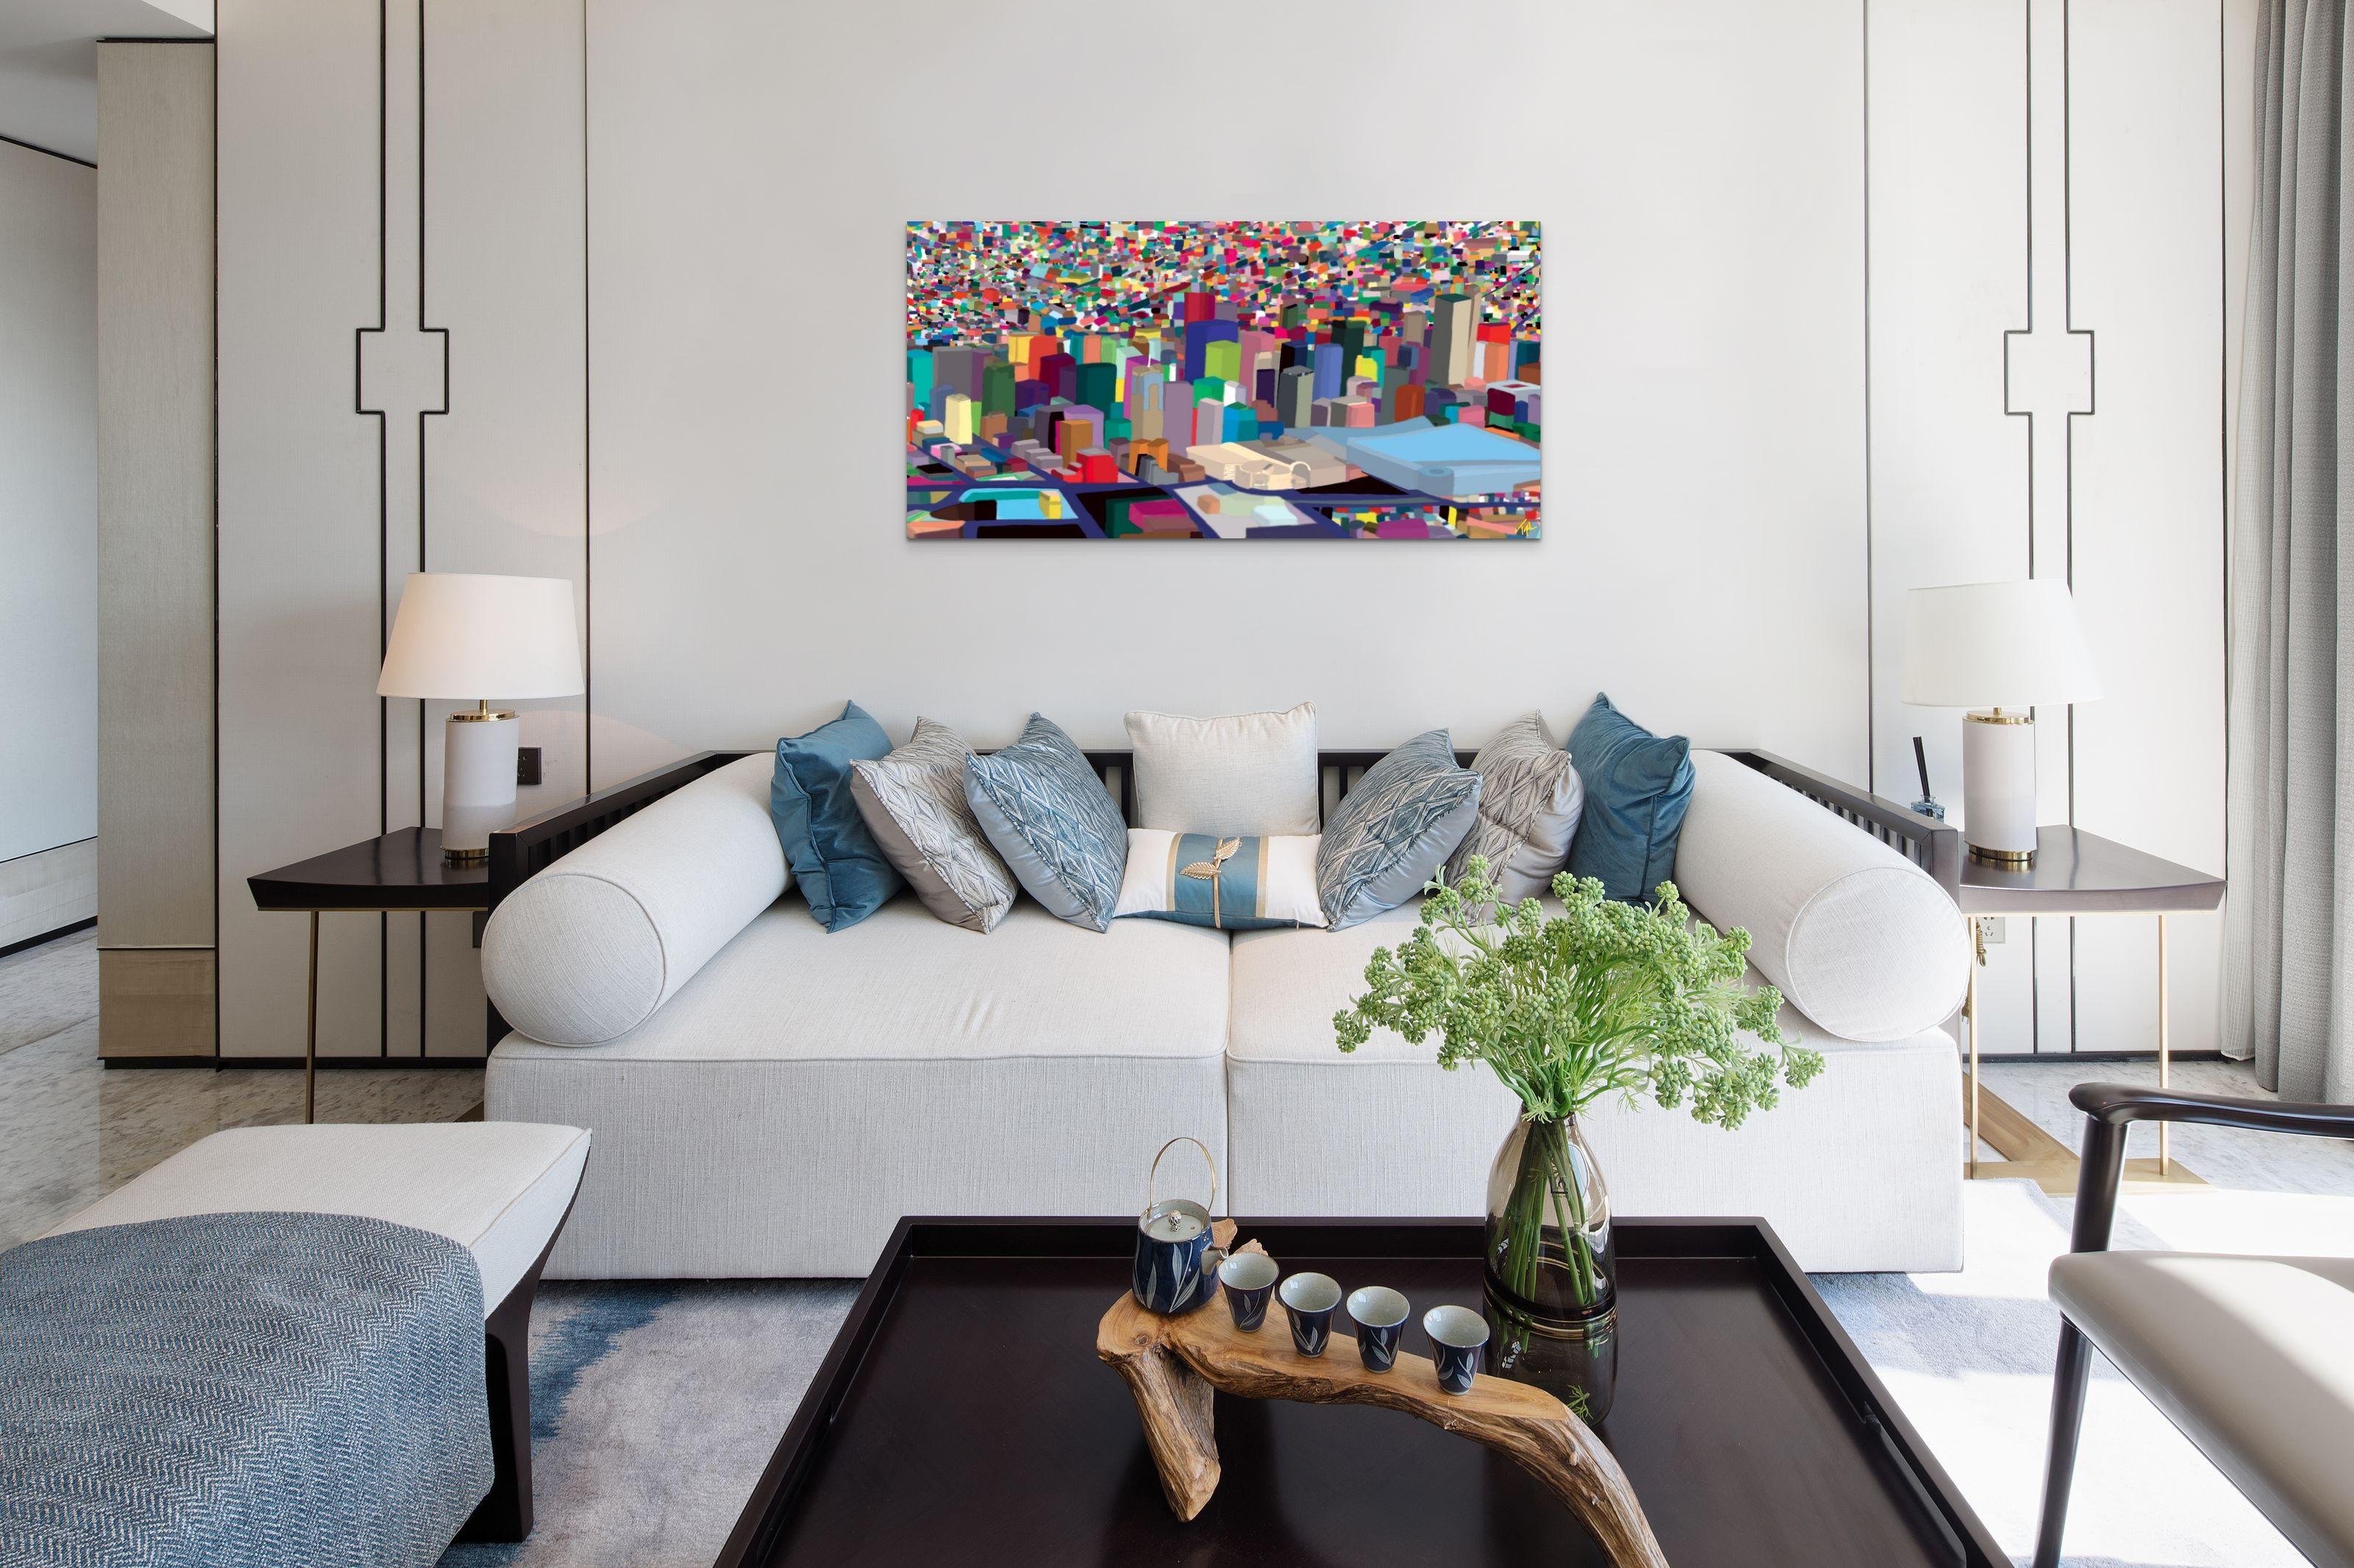 Denver Day, Modern Colorful Impressionist Cityscape Painting, Colorado, Ltd Ed - Gray Landscape Painting by Topher Straus